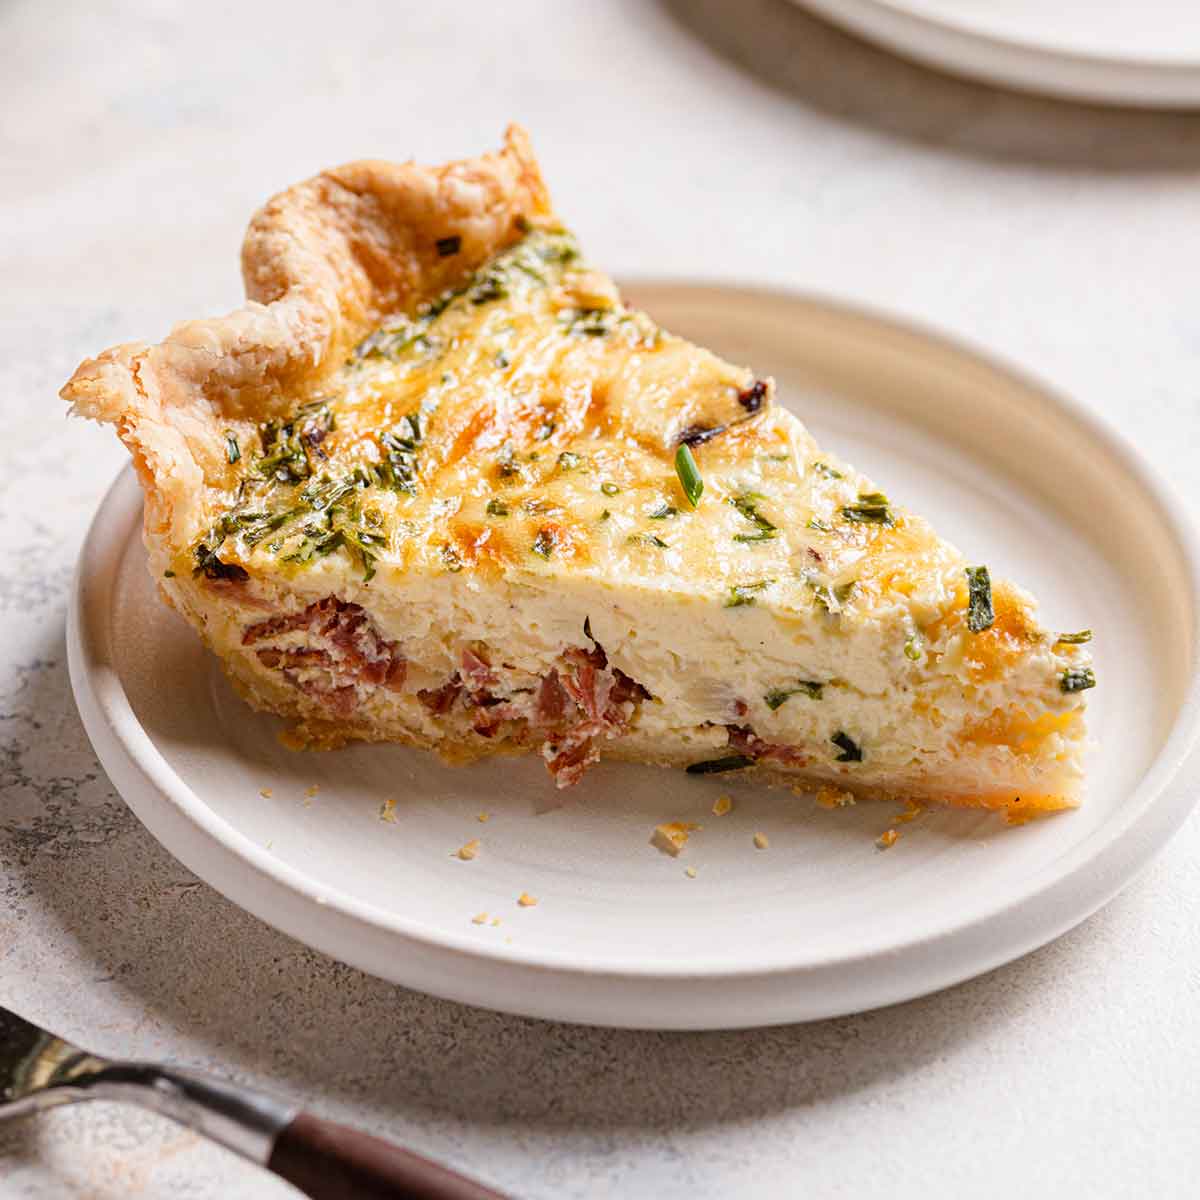 Side view of a slice of quiche on a white plate.